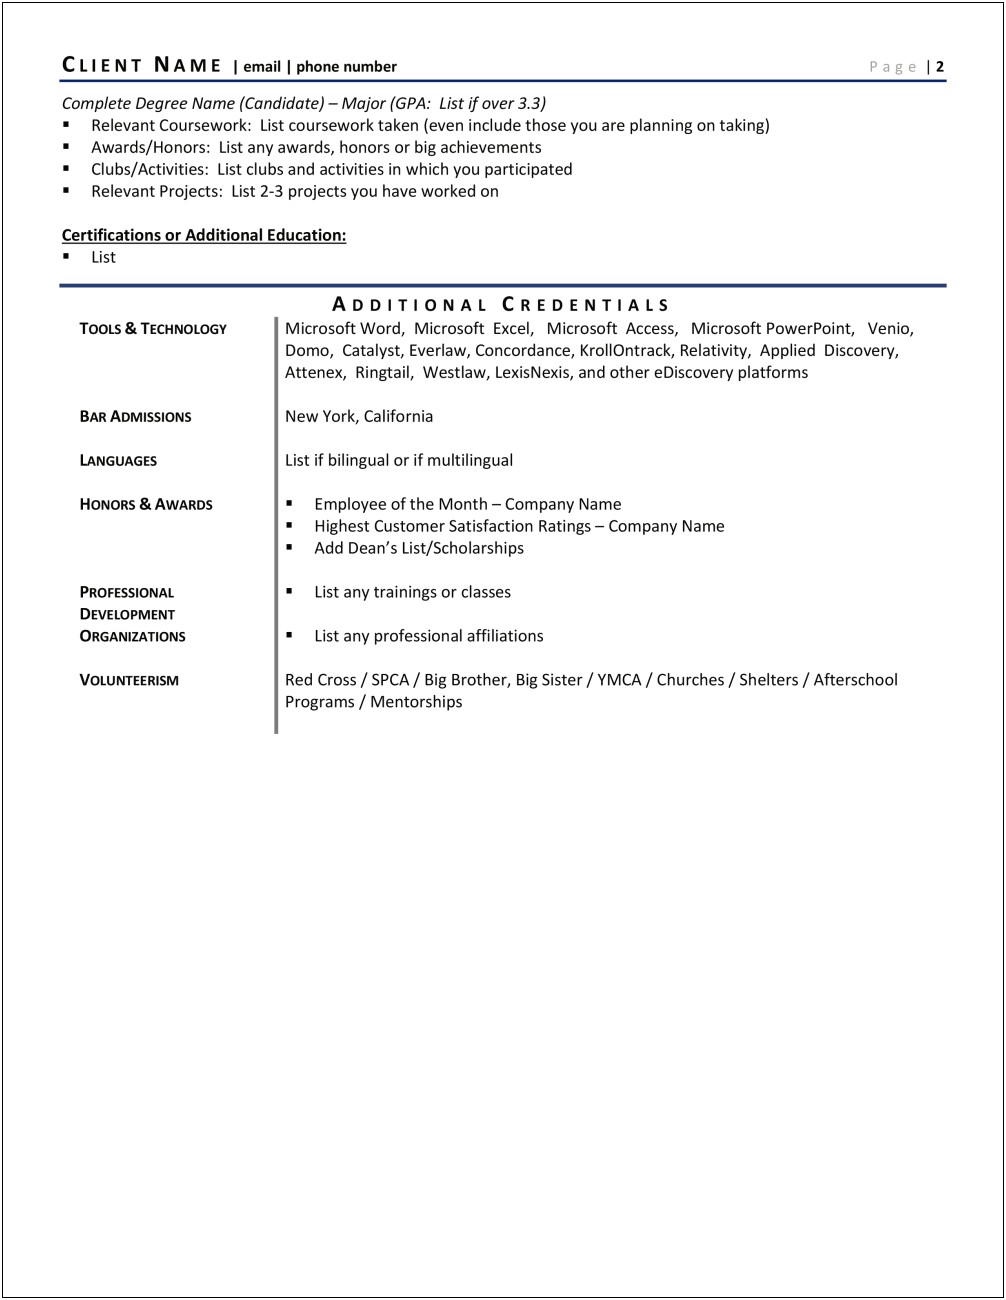 Resume For Legal Assistant Skills